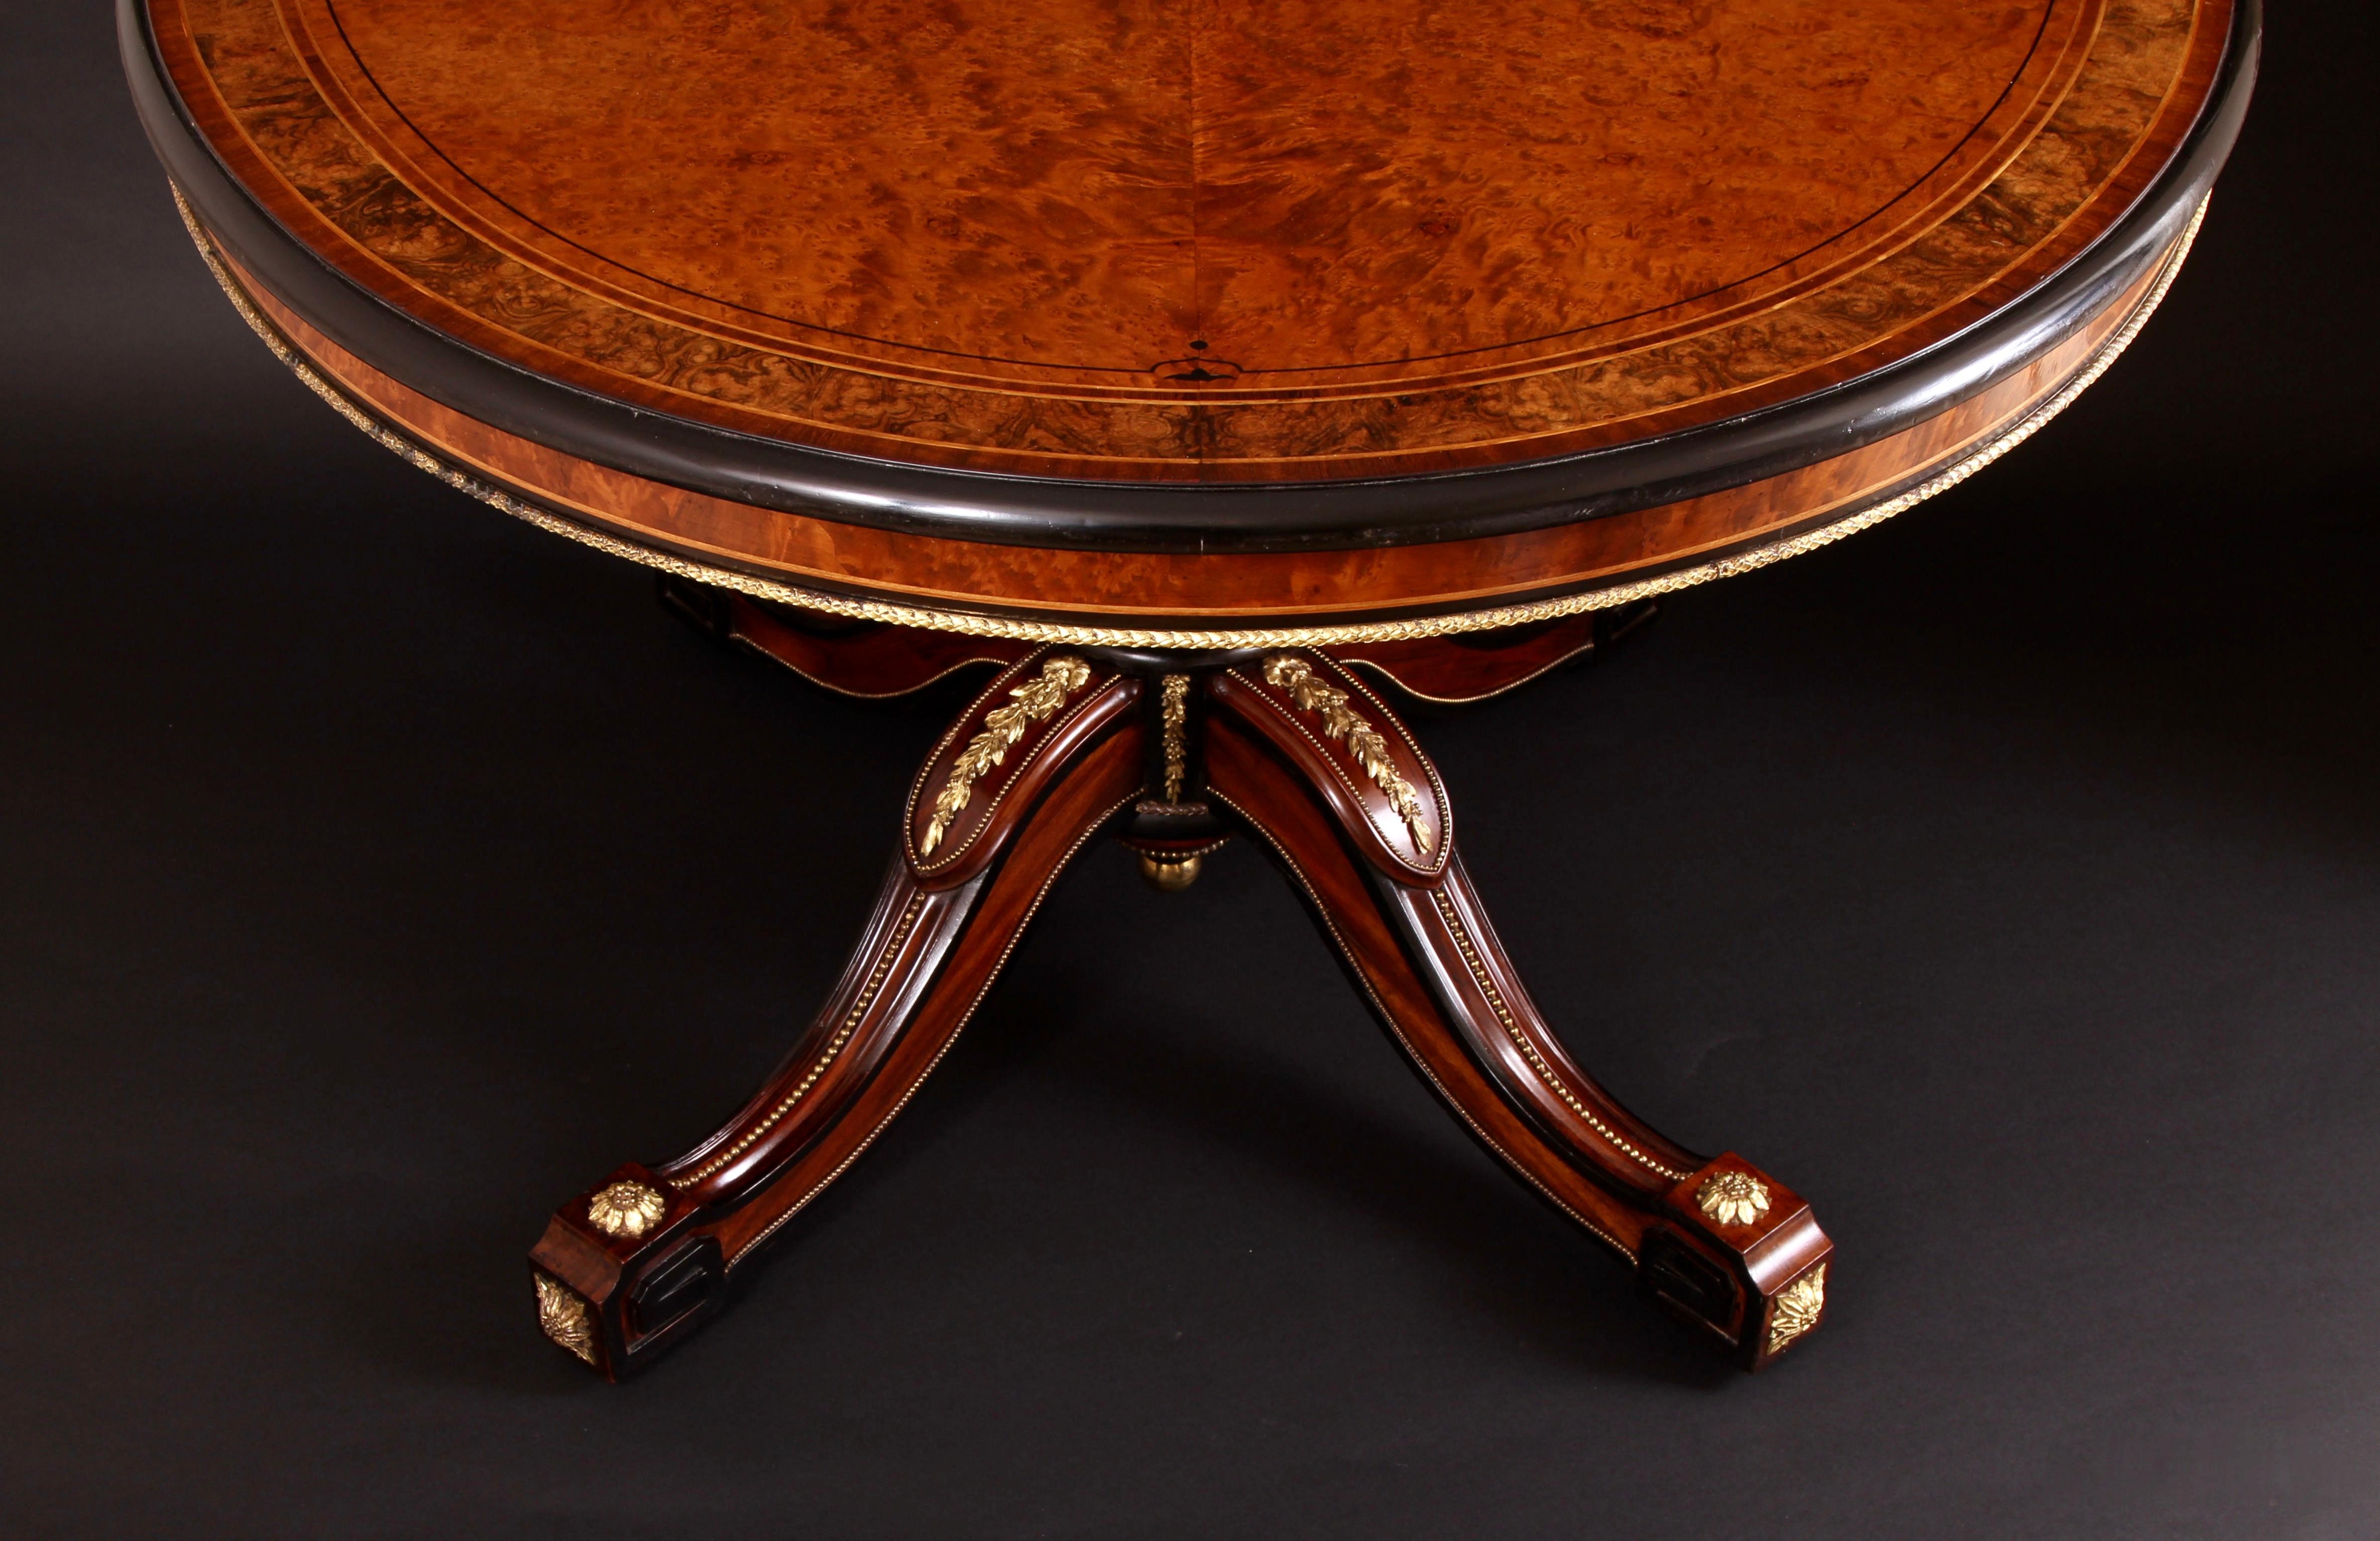 • One of the finest pieces of 19th century English furniture ever made
• Firmly attributed to the Royal cabinetmaker, Holland & Sons
• Made using stunning rare & exotic timbers, Thuya & Goncalo Alves with a fabulous colour and